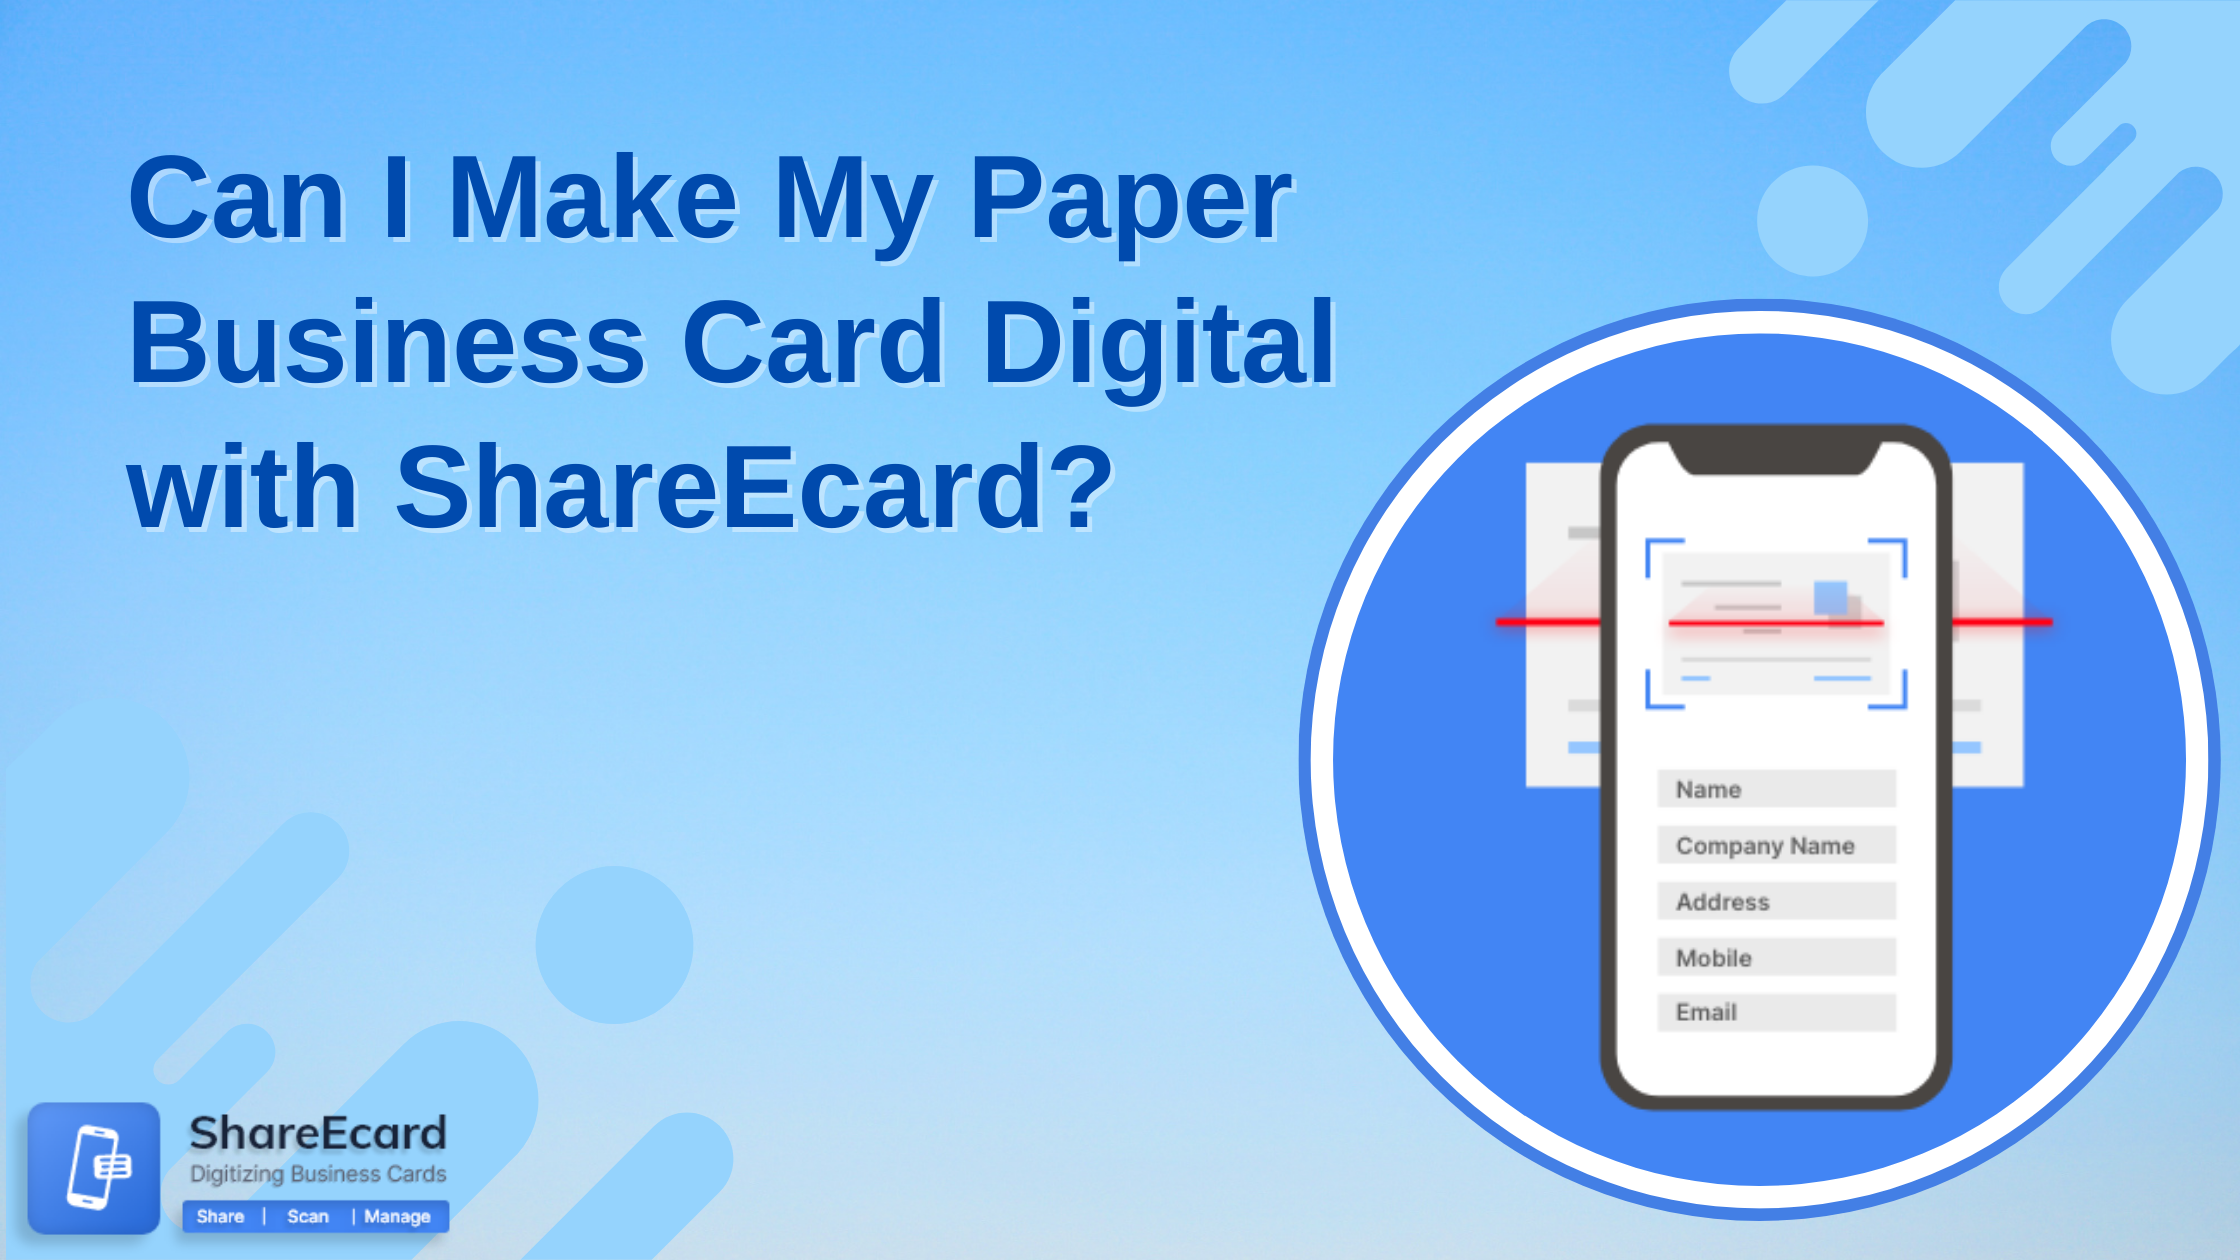 How to Digitize Business Cards with ShareEcard